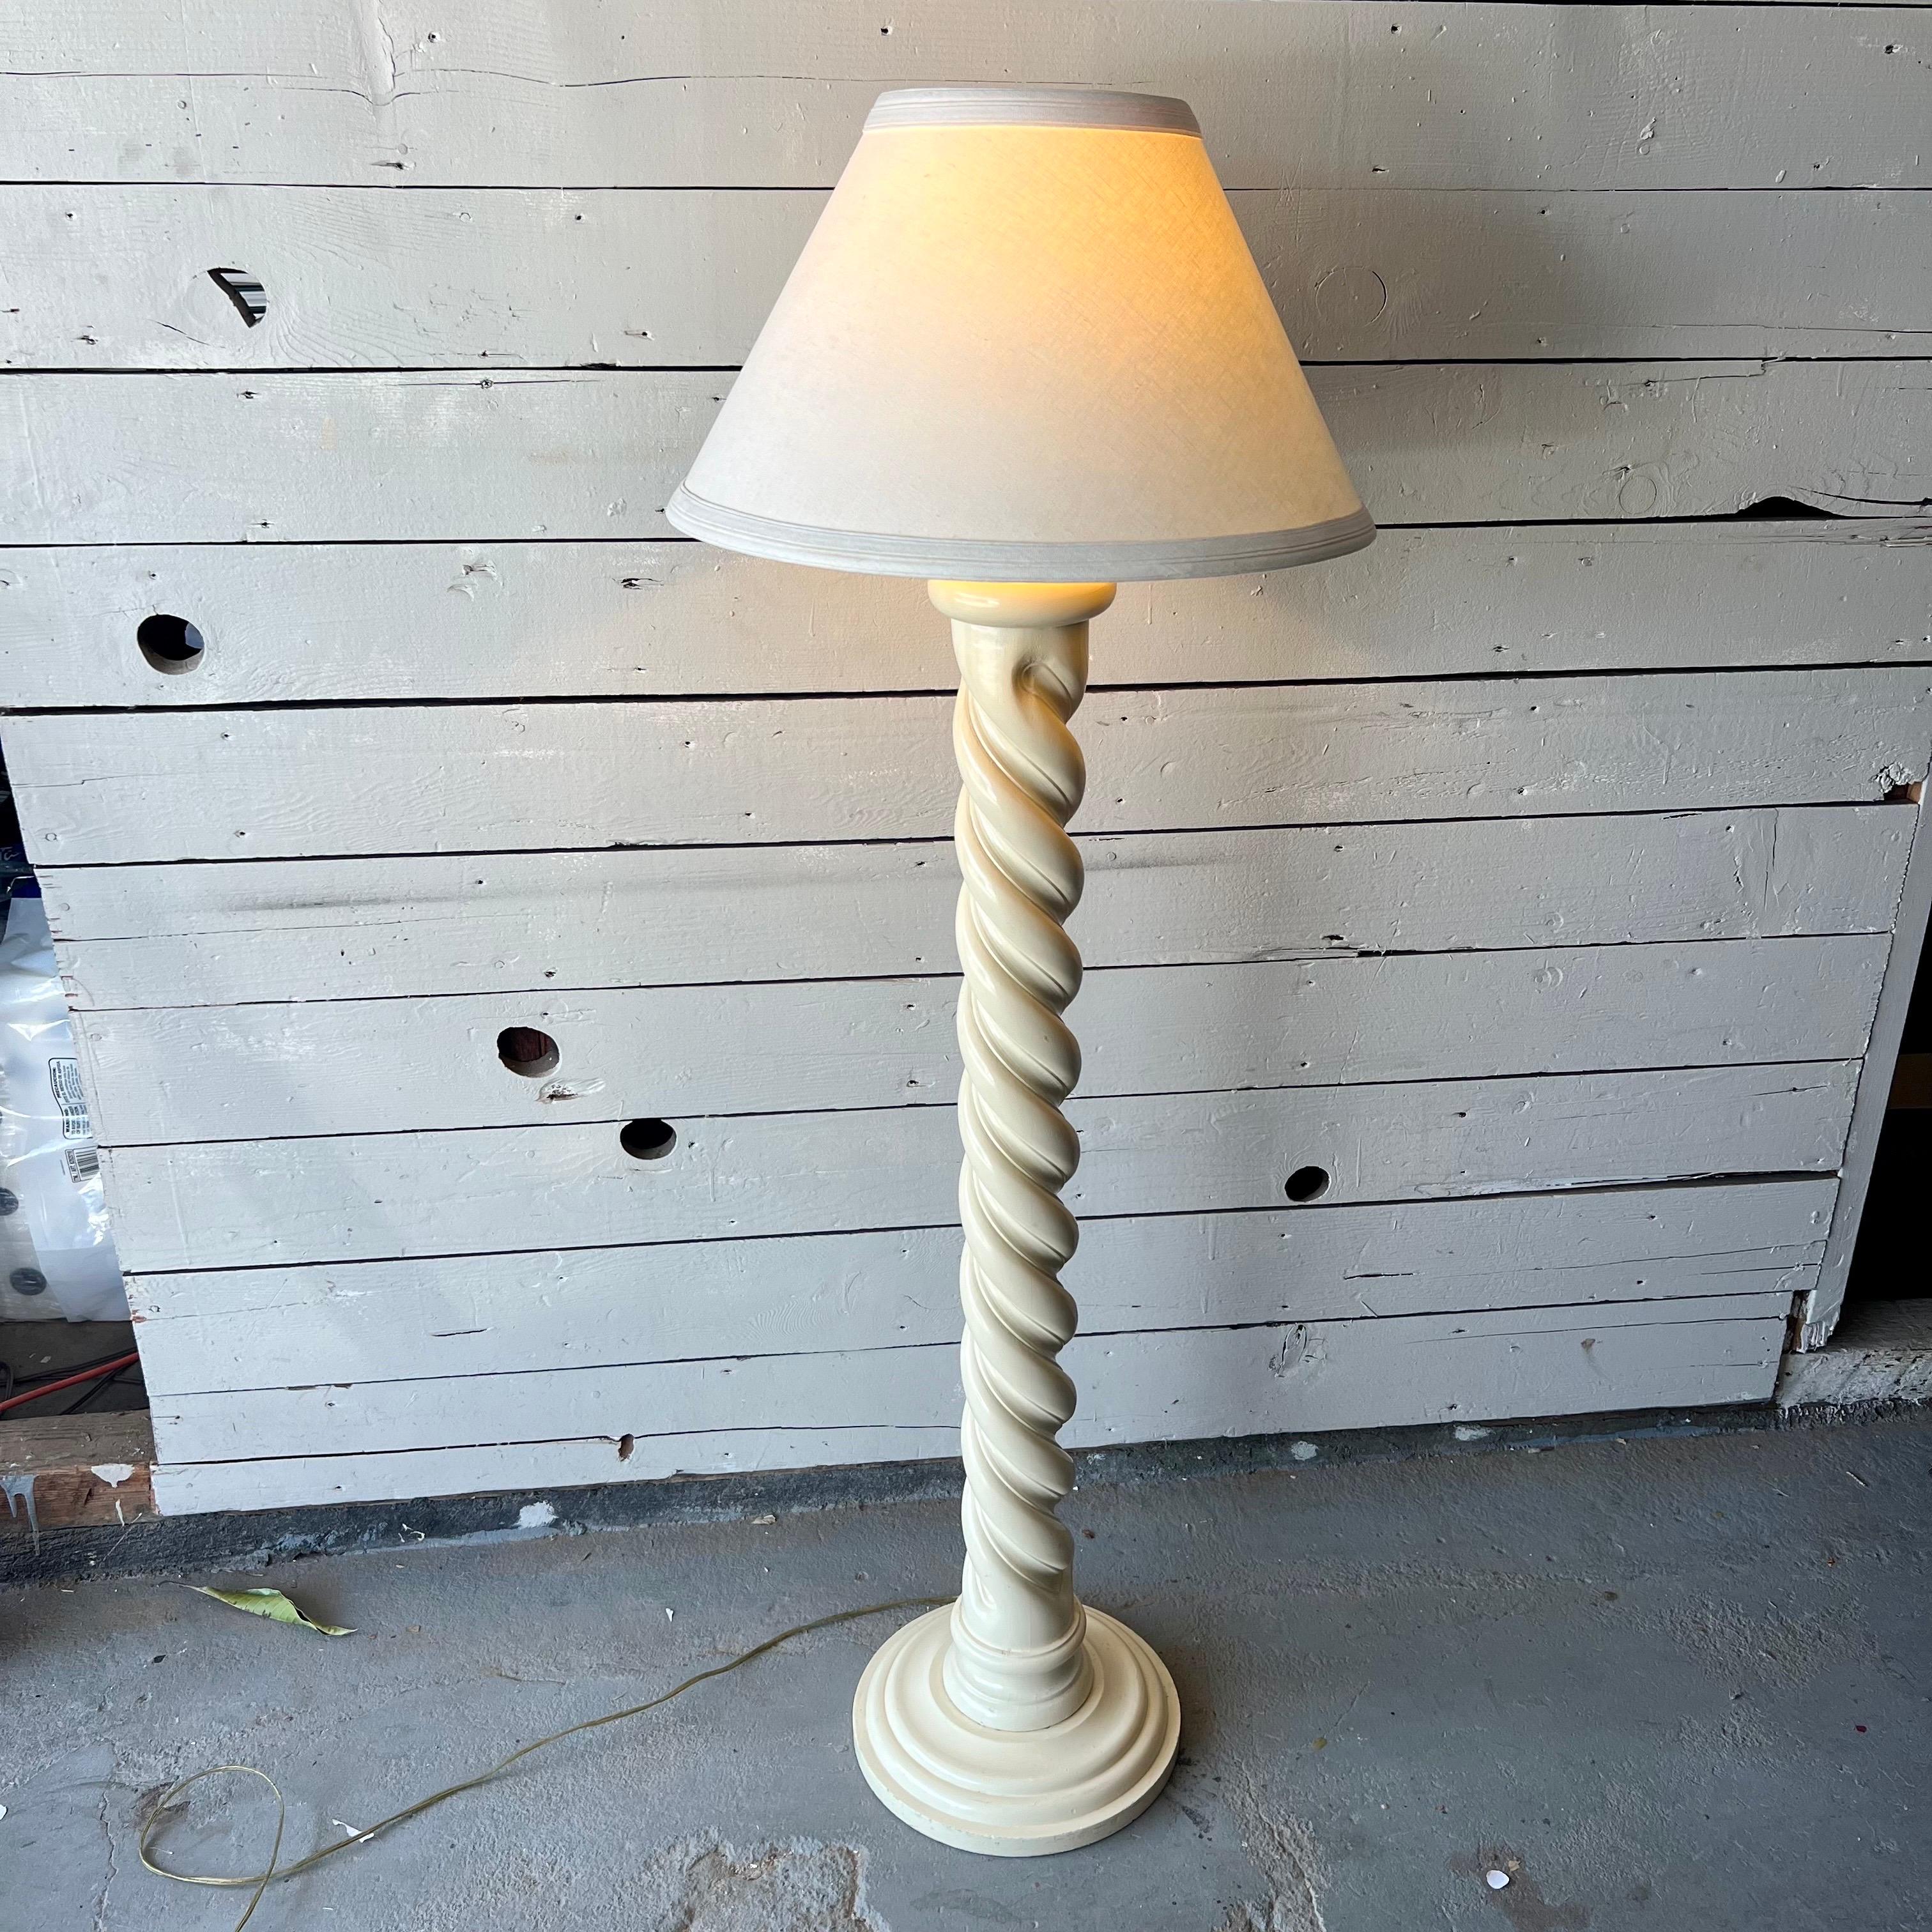 This vintage Italian lacquered spiral lamp, carved from wood, features a sleek spiral design. Its lacquered finish adds shine, highlighting the craftsmanship evident in its curves. This lamp’s timeless appeal makes it a standout piece in any room.